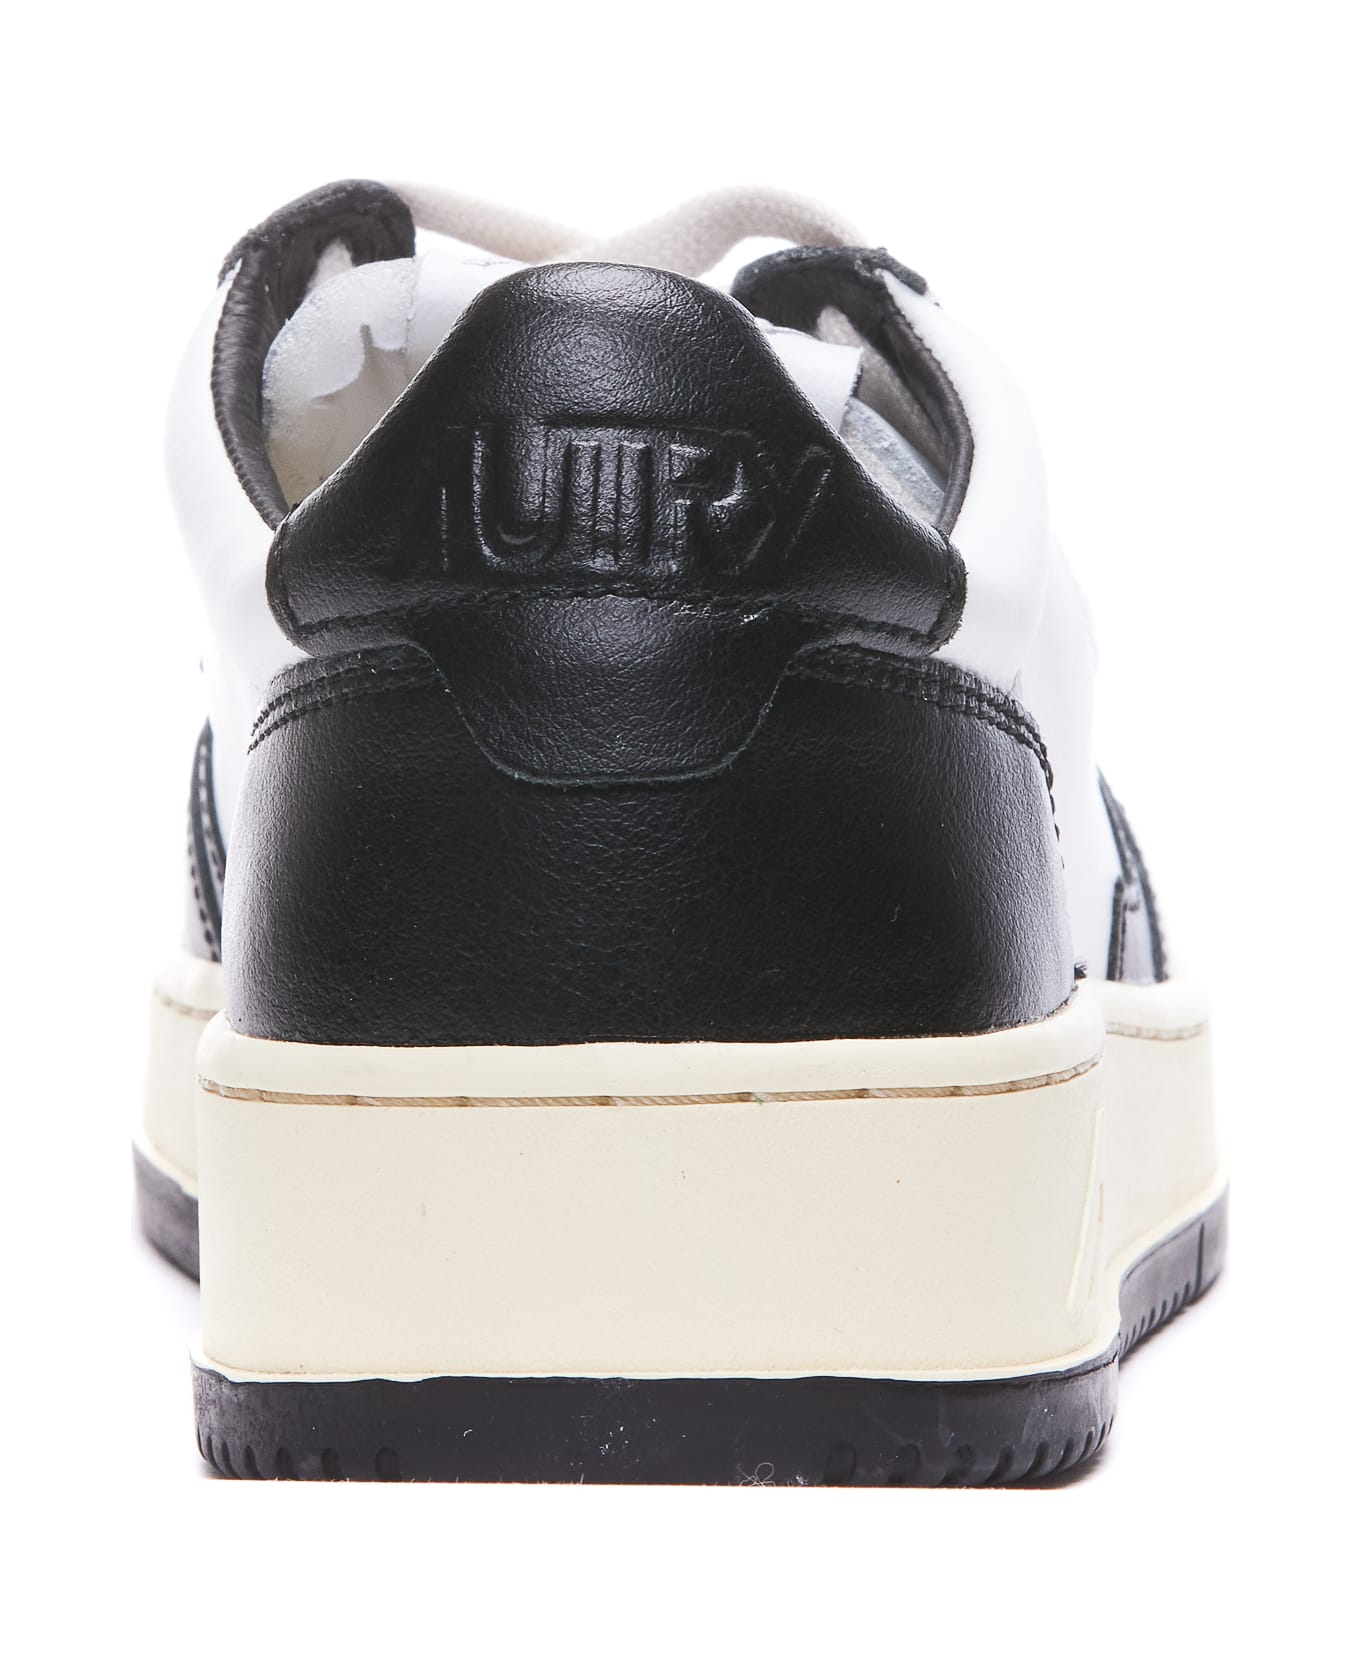 Autry Medalist Sneakers - Wht/blk スニーカー